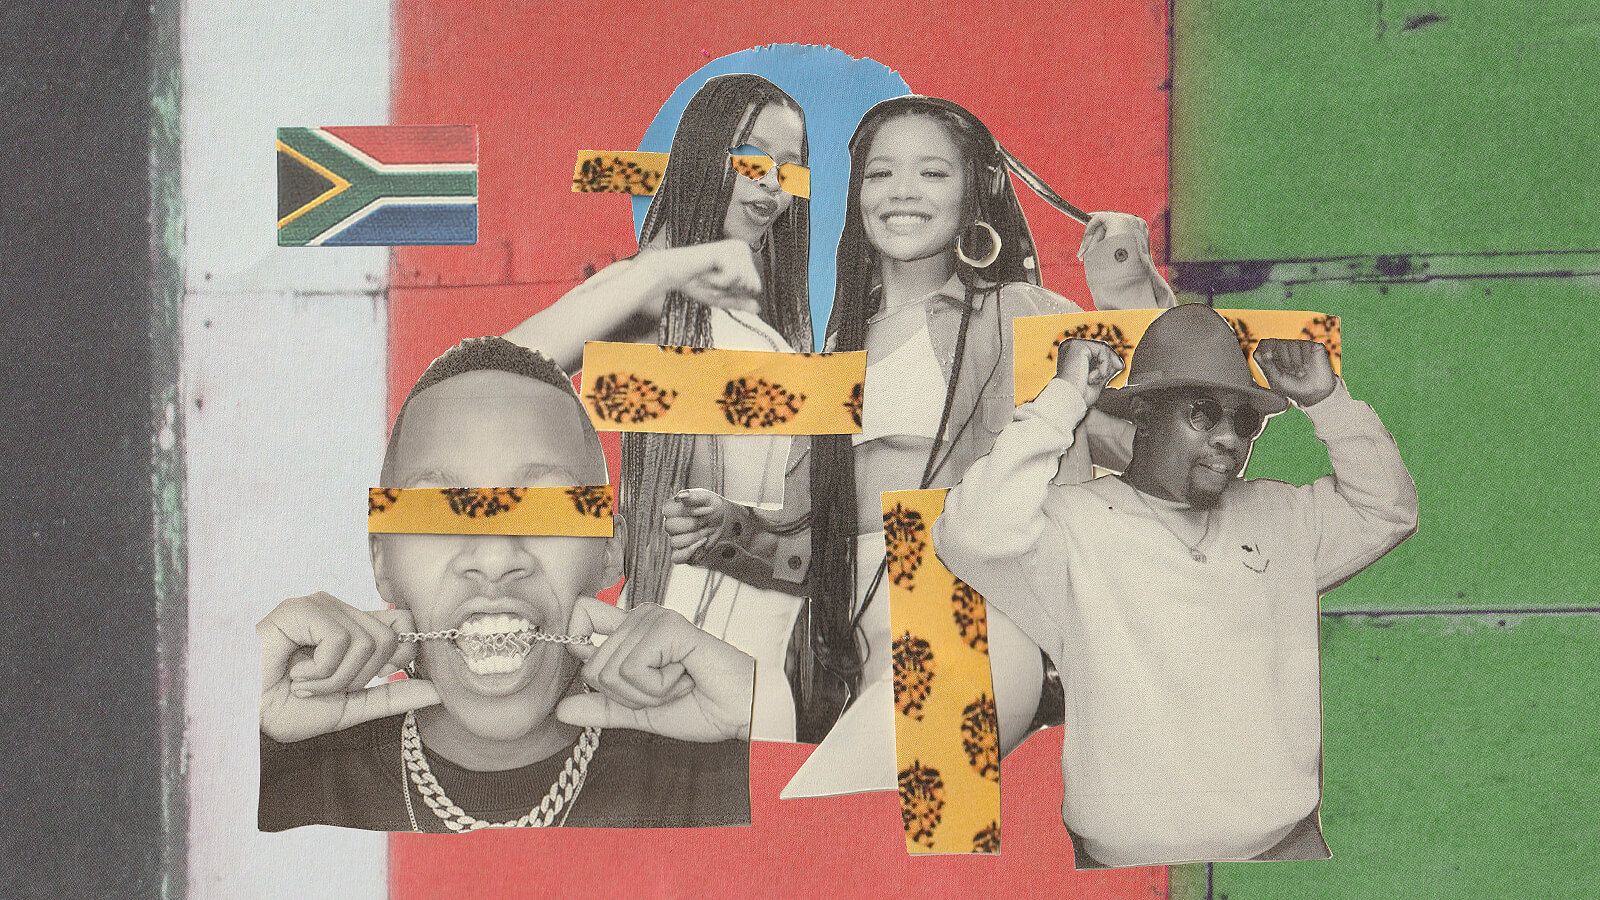 A collage of images featuring the South African flag and DJs dancing